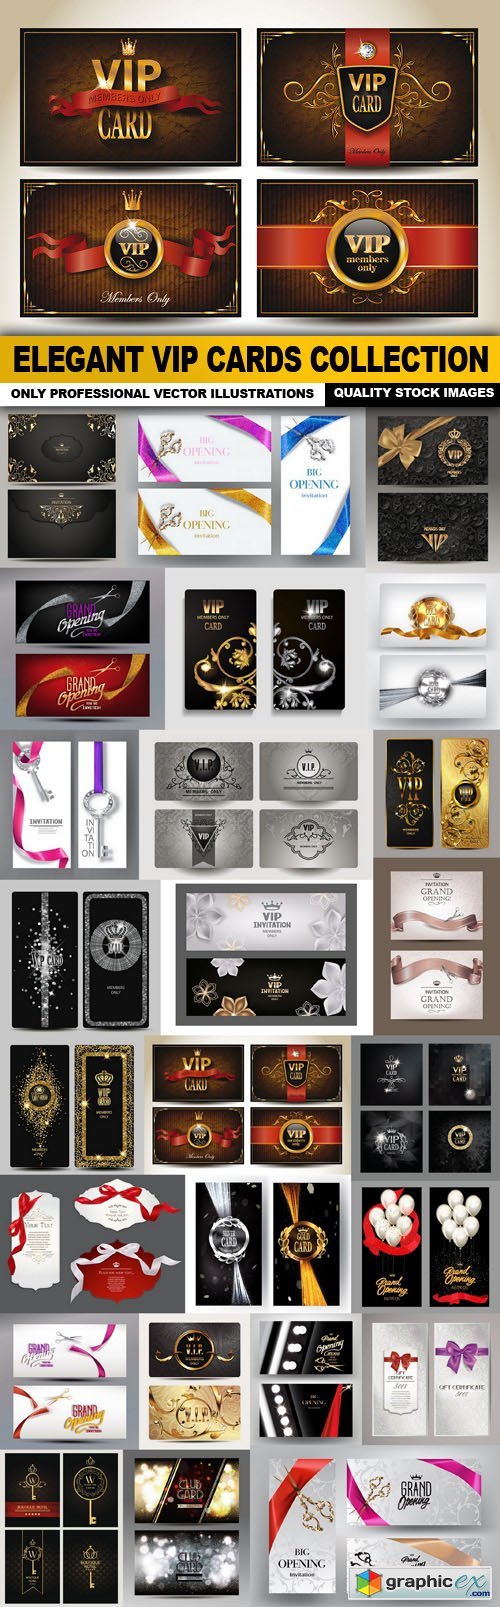 Elegant VIP Cards Collection